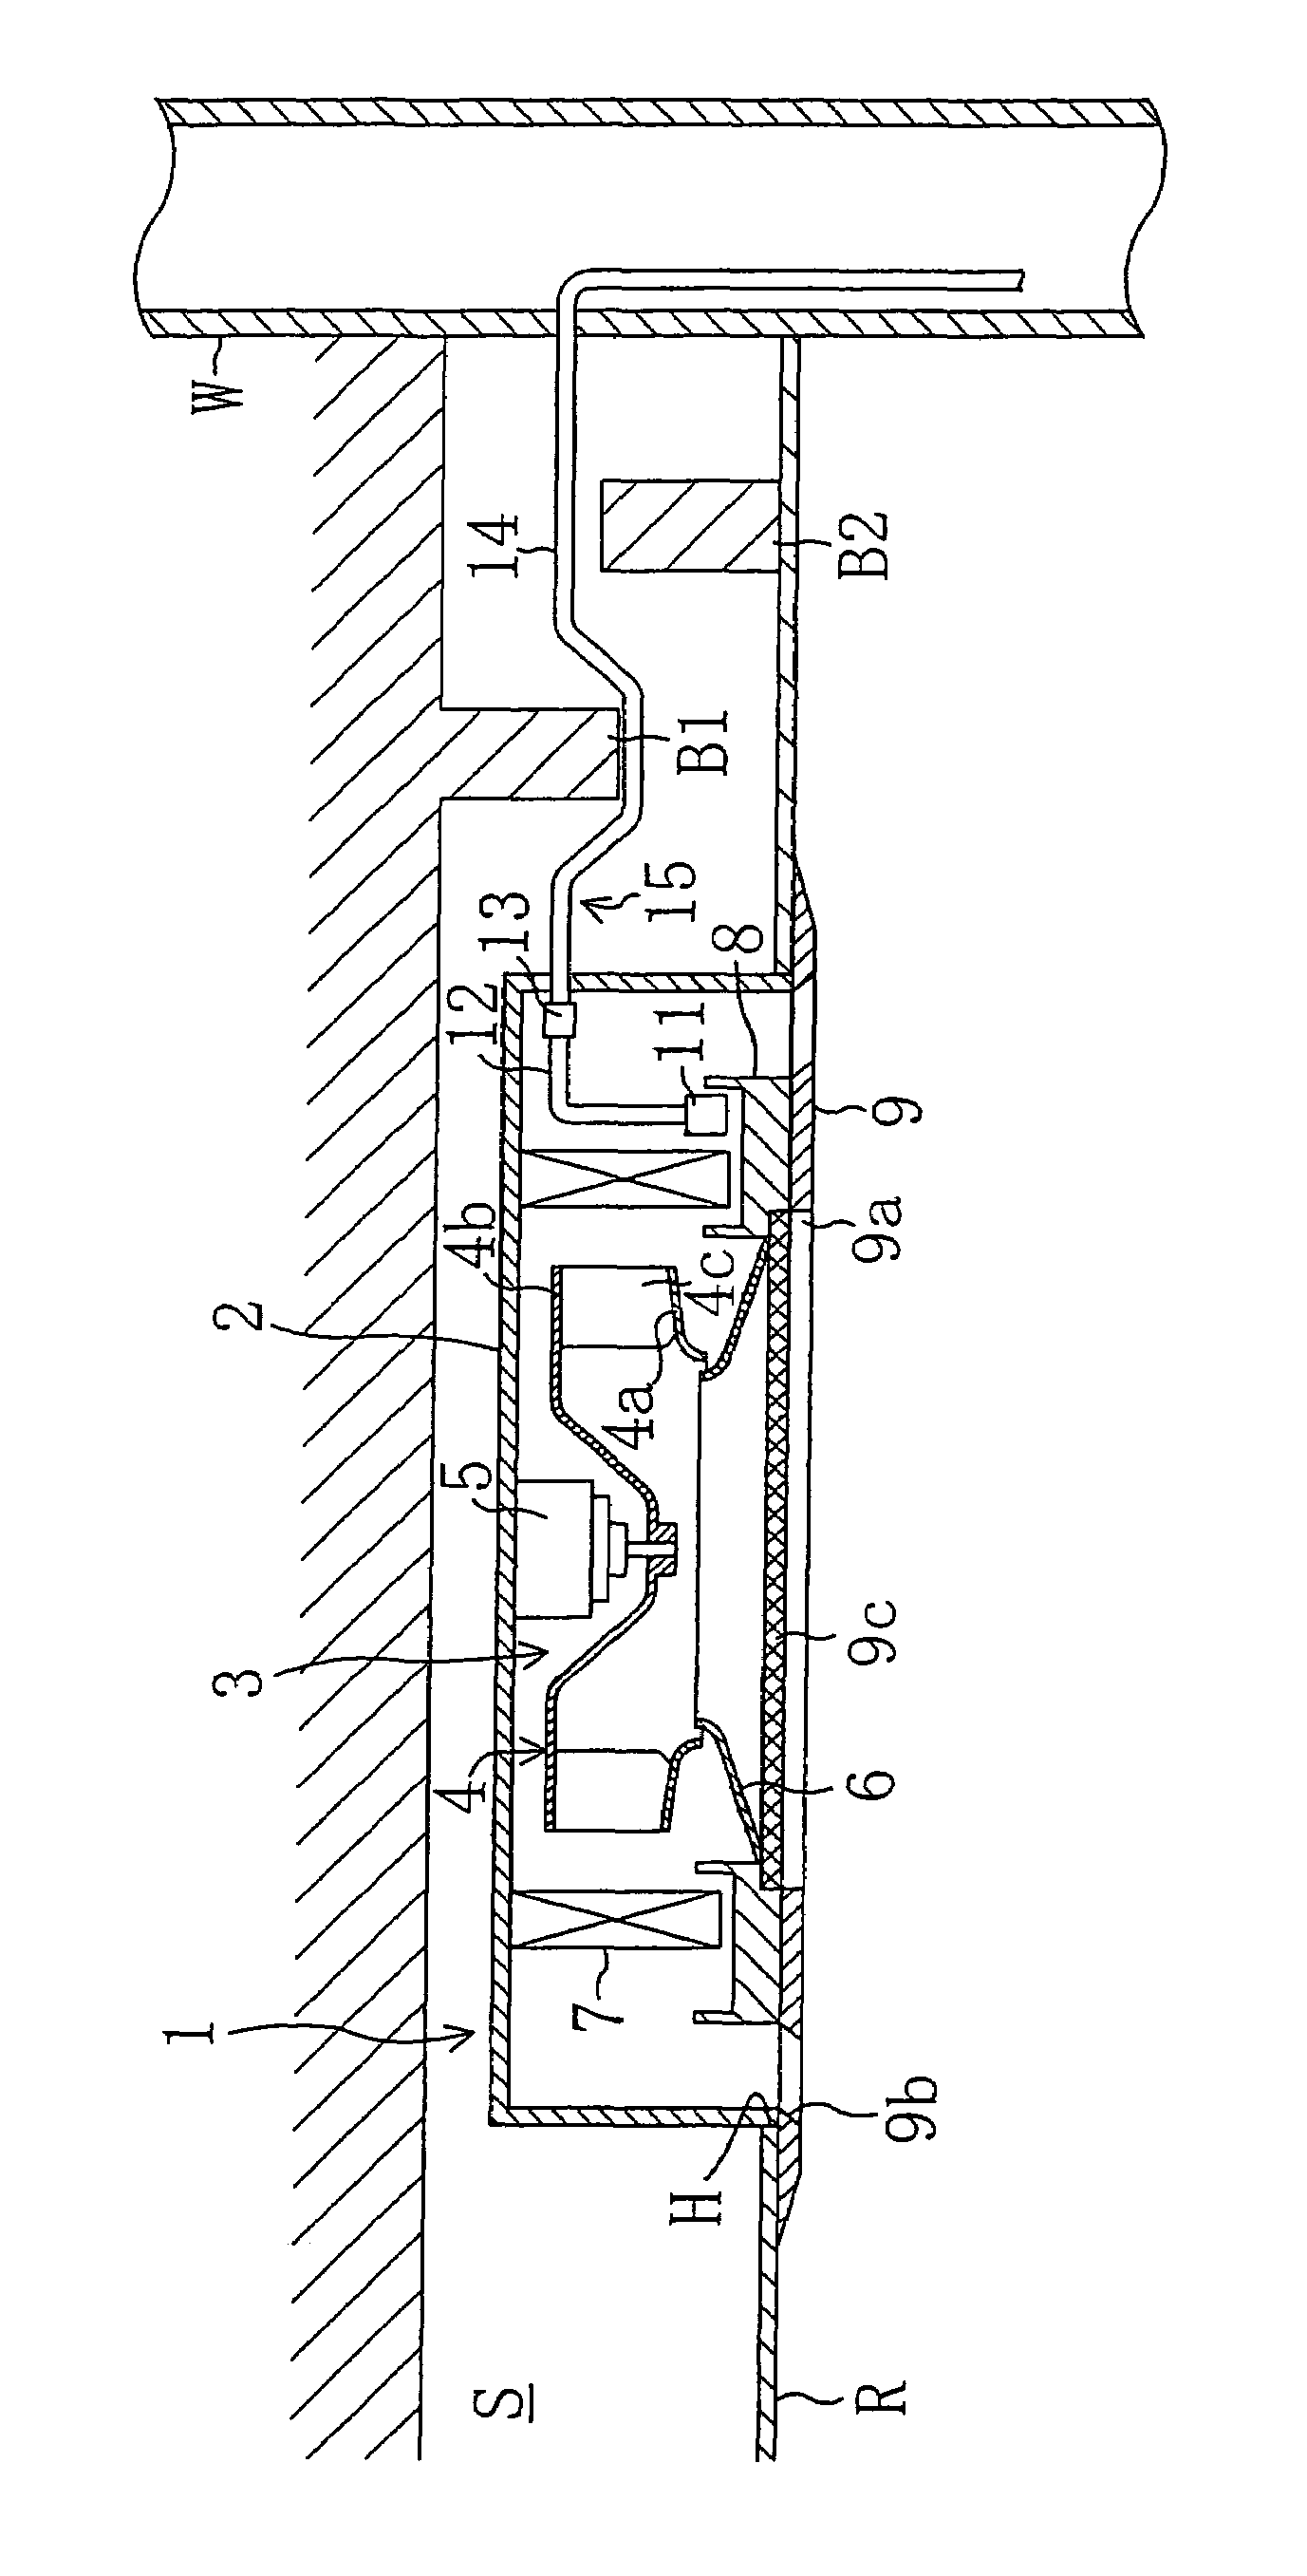 Drain water discharge structure for air conditioning apparatus